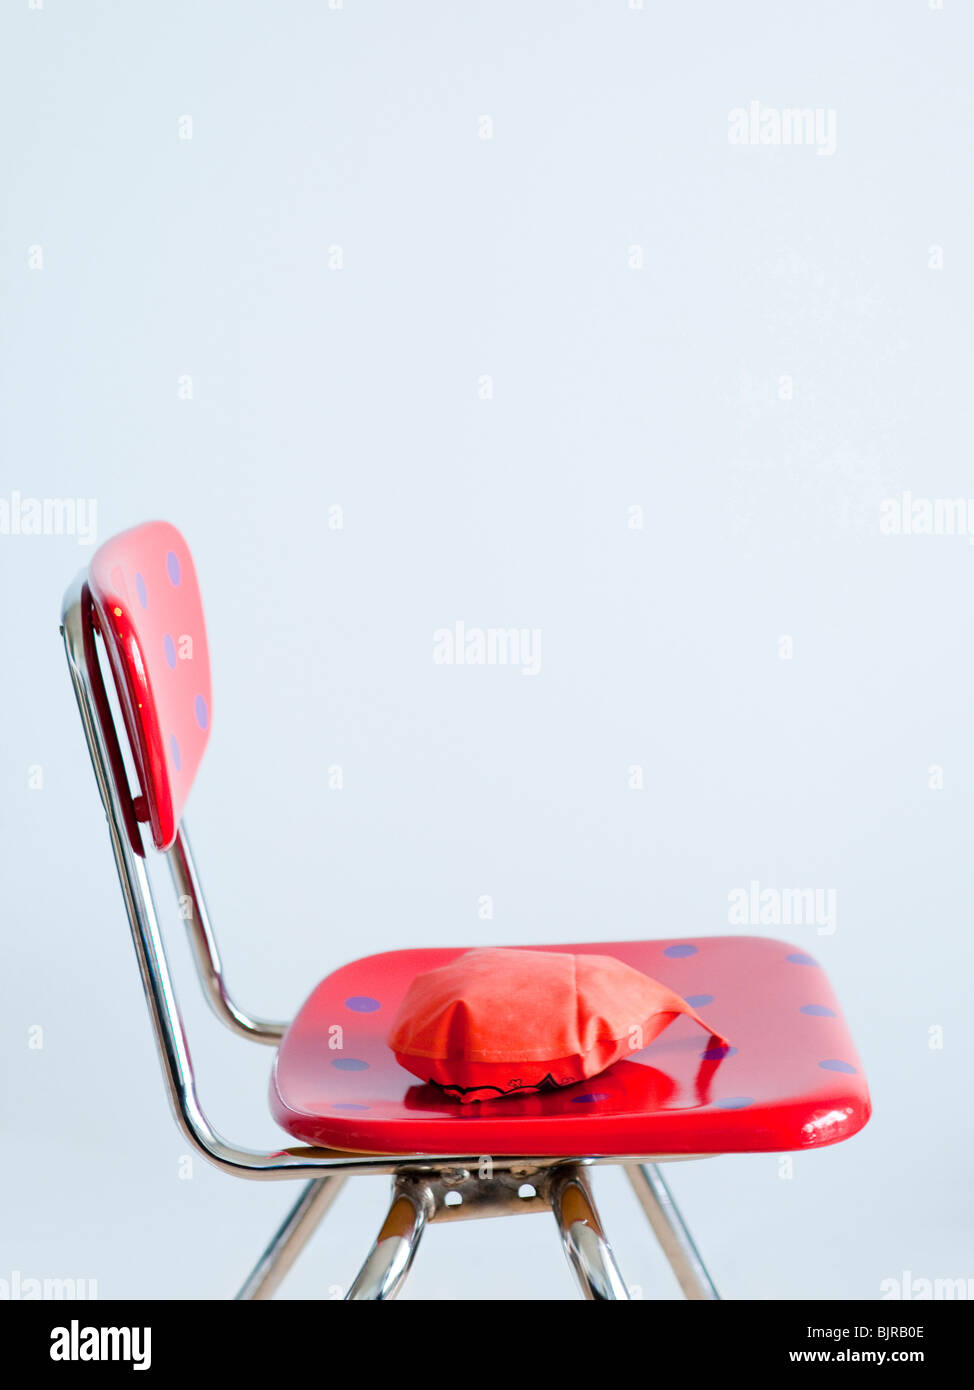 Red whoopie cushion on red spotted chair, studio shot Stock Photo